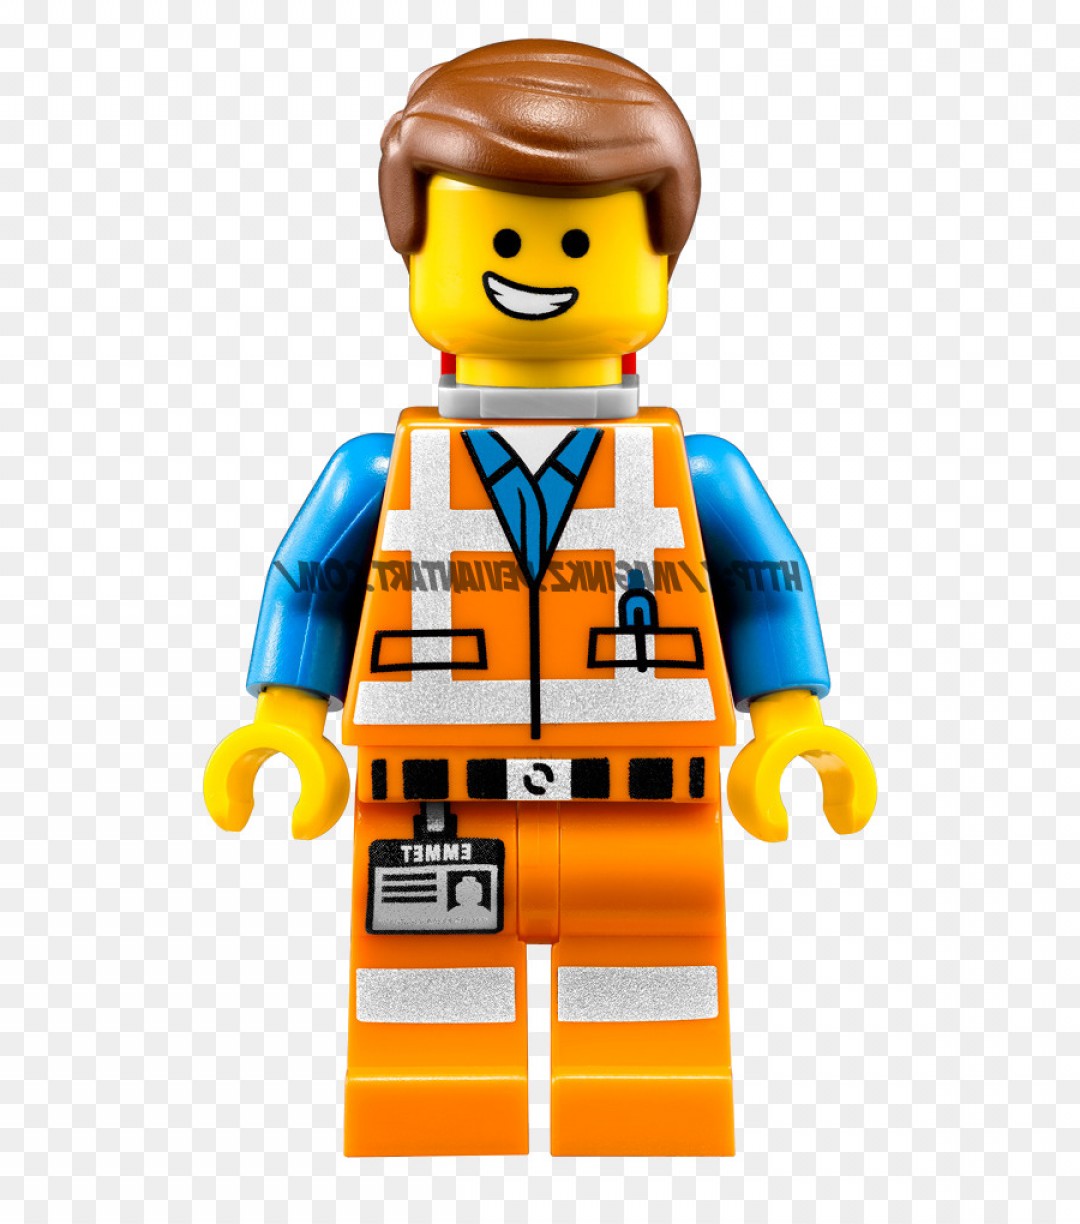 download free lego character creator online